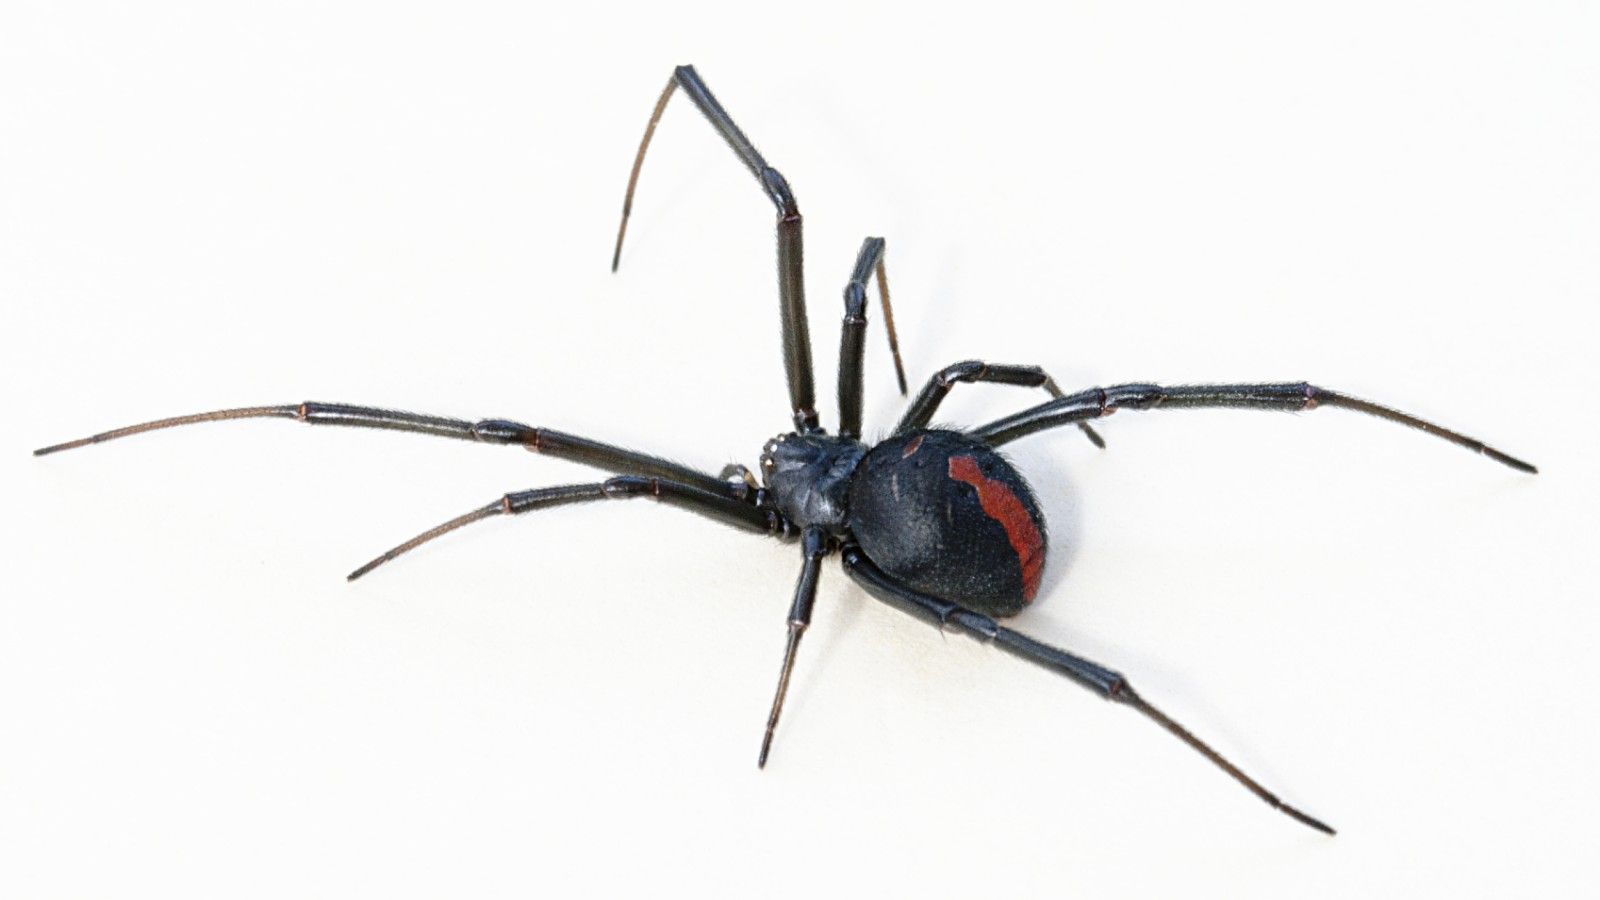 <p>                     Due to its strikingly similar appearance, the redback spider (<em>Latrodectus hasselti</em>) was once thought to be a sub species of the black widow spider, but it is a distinct species. Also known as the Australian black widow, you can find this creepy crawly throughout Australia, Southeast Asia and New Zealand. The redback spider has even been found in Japan, the United Arab Emirates and Belgium due to inadvertent introductions.                   </p>                                      <p>                     Highly venomous, the bite from the female redback spider can be life-threatening. Using its fangs, it injects a complex venom that causes intense pain at the bite area, in addition to sweating and goosebumps. As time goes on, these symptoms worsen and there may also be redness and swelling, as well as nausea, muscle twitching, headache and fever. Respiratory failure may occur in severe cases. Thankfully, in 1956 scientists released a redback spider antivenom which is very effective, even when used several weeks after the initial bite. No deaths have been reported since.                   </p>